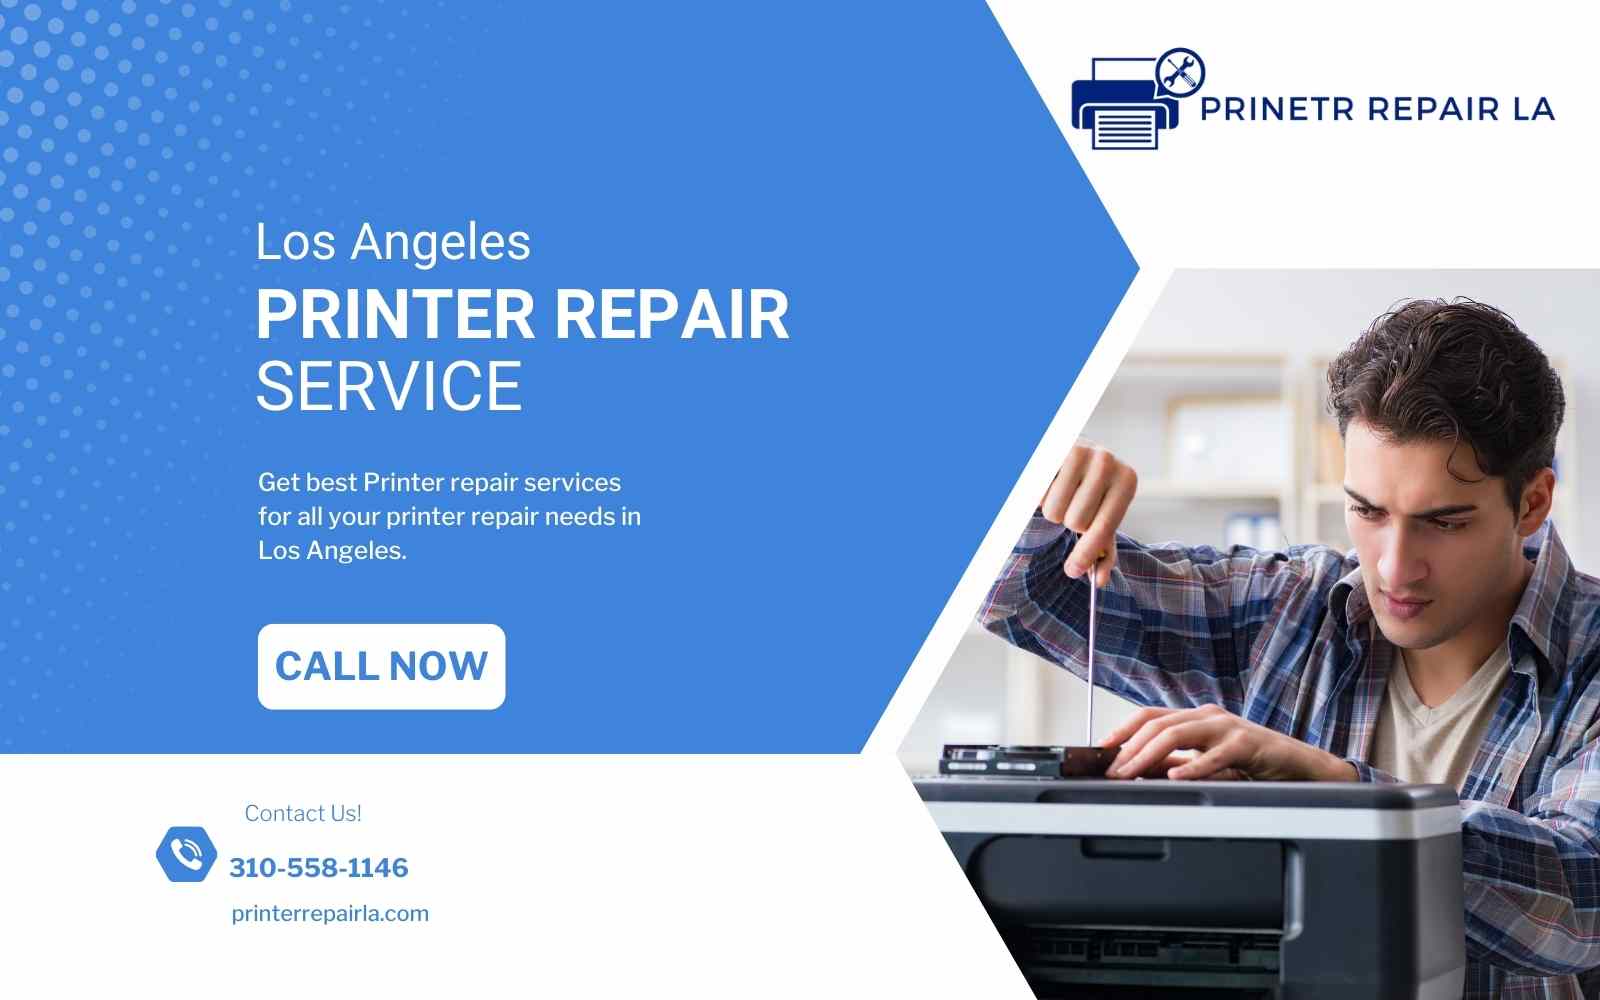 You are currently viewing Fast and Reliable Printer Repair Services in Los Angeles with Printer Repair LA